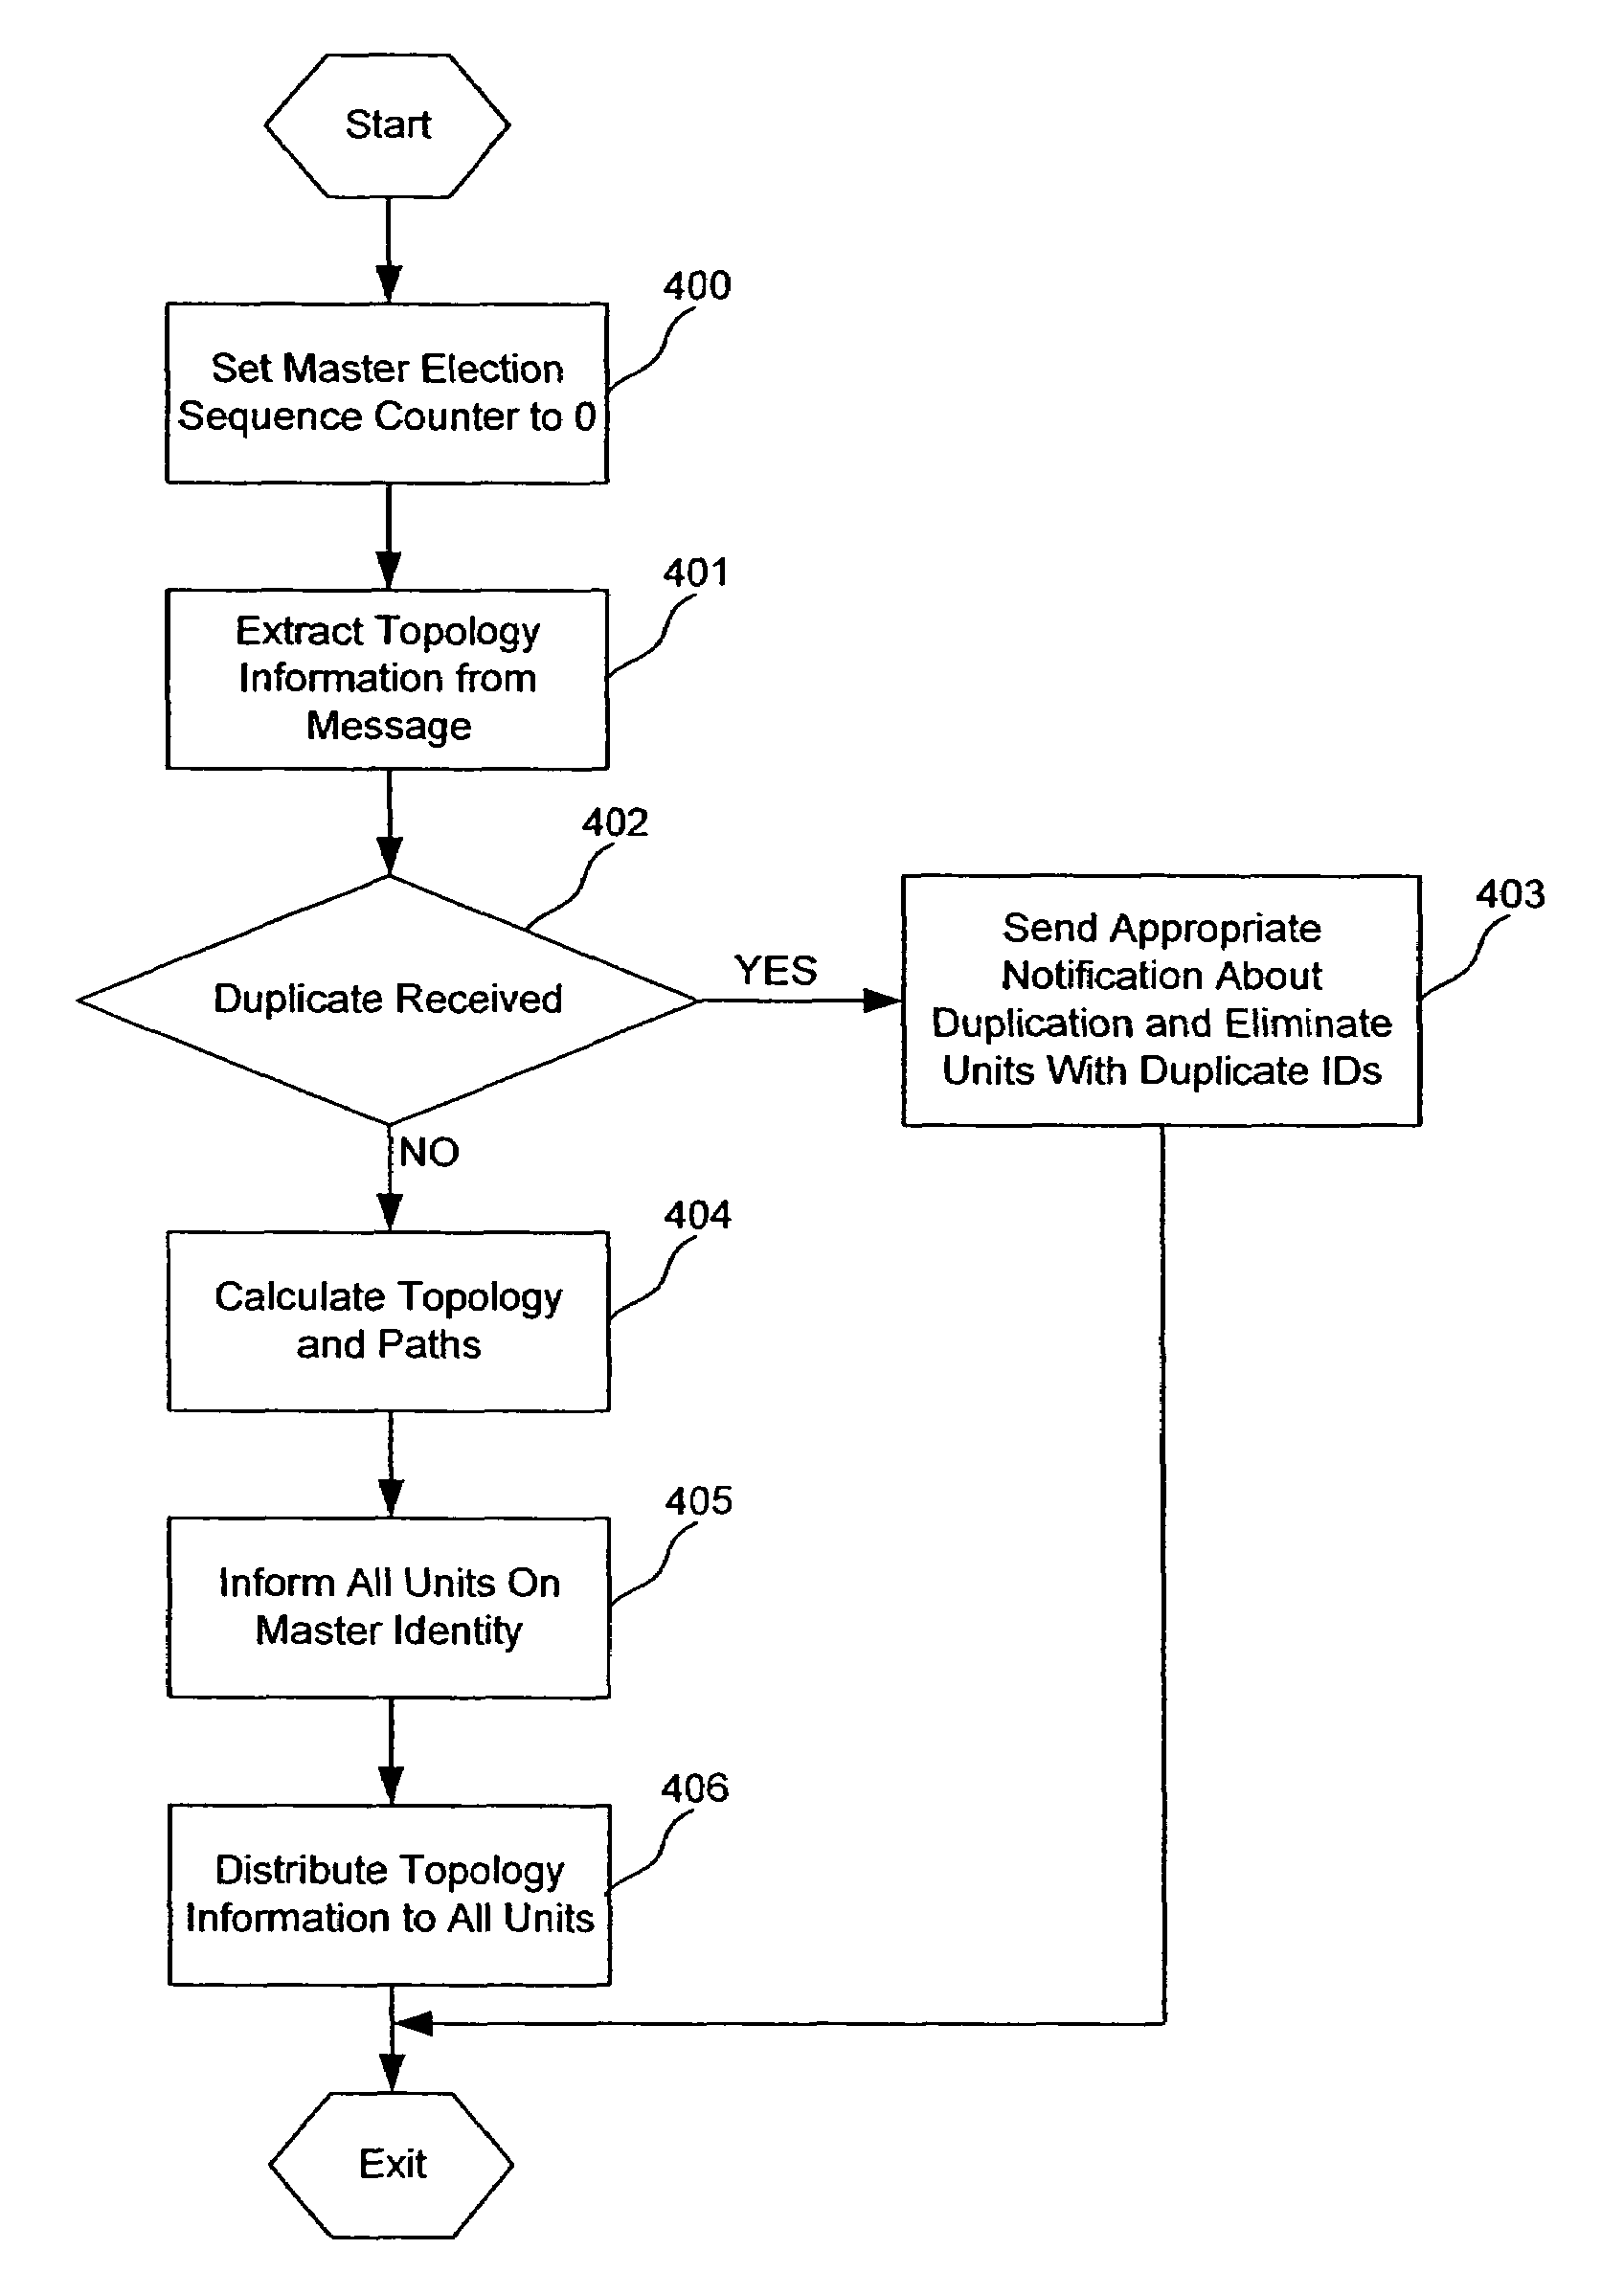 Apparatus and method for master election and topology discovery in an Ethernet network